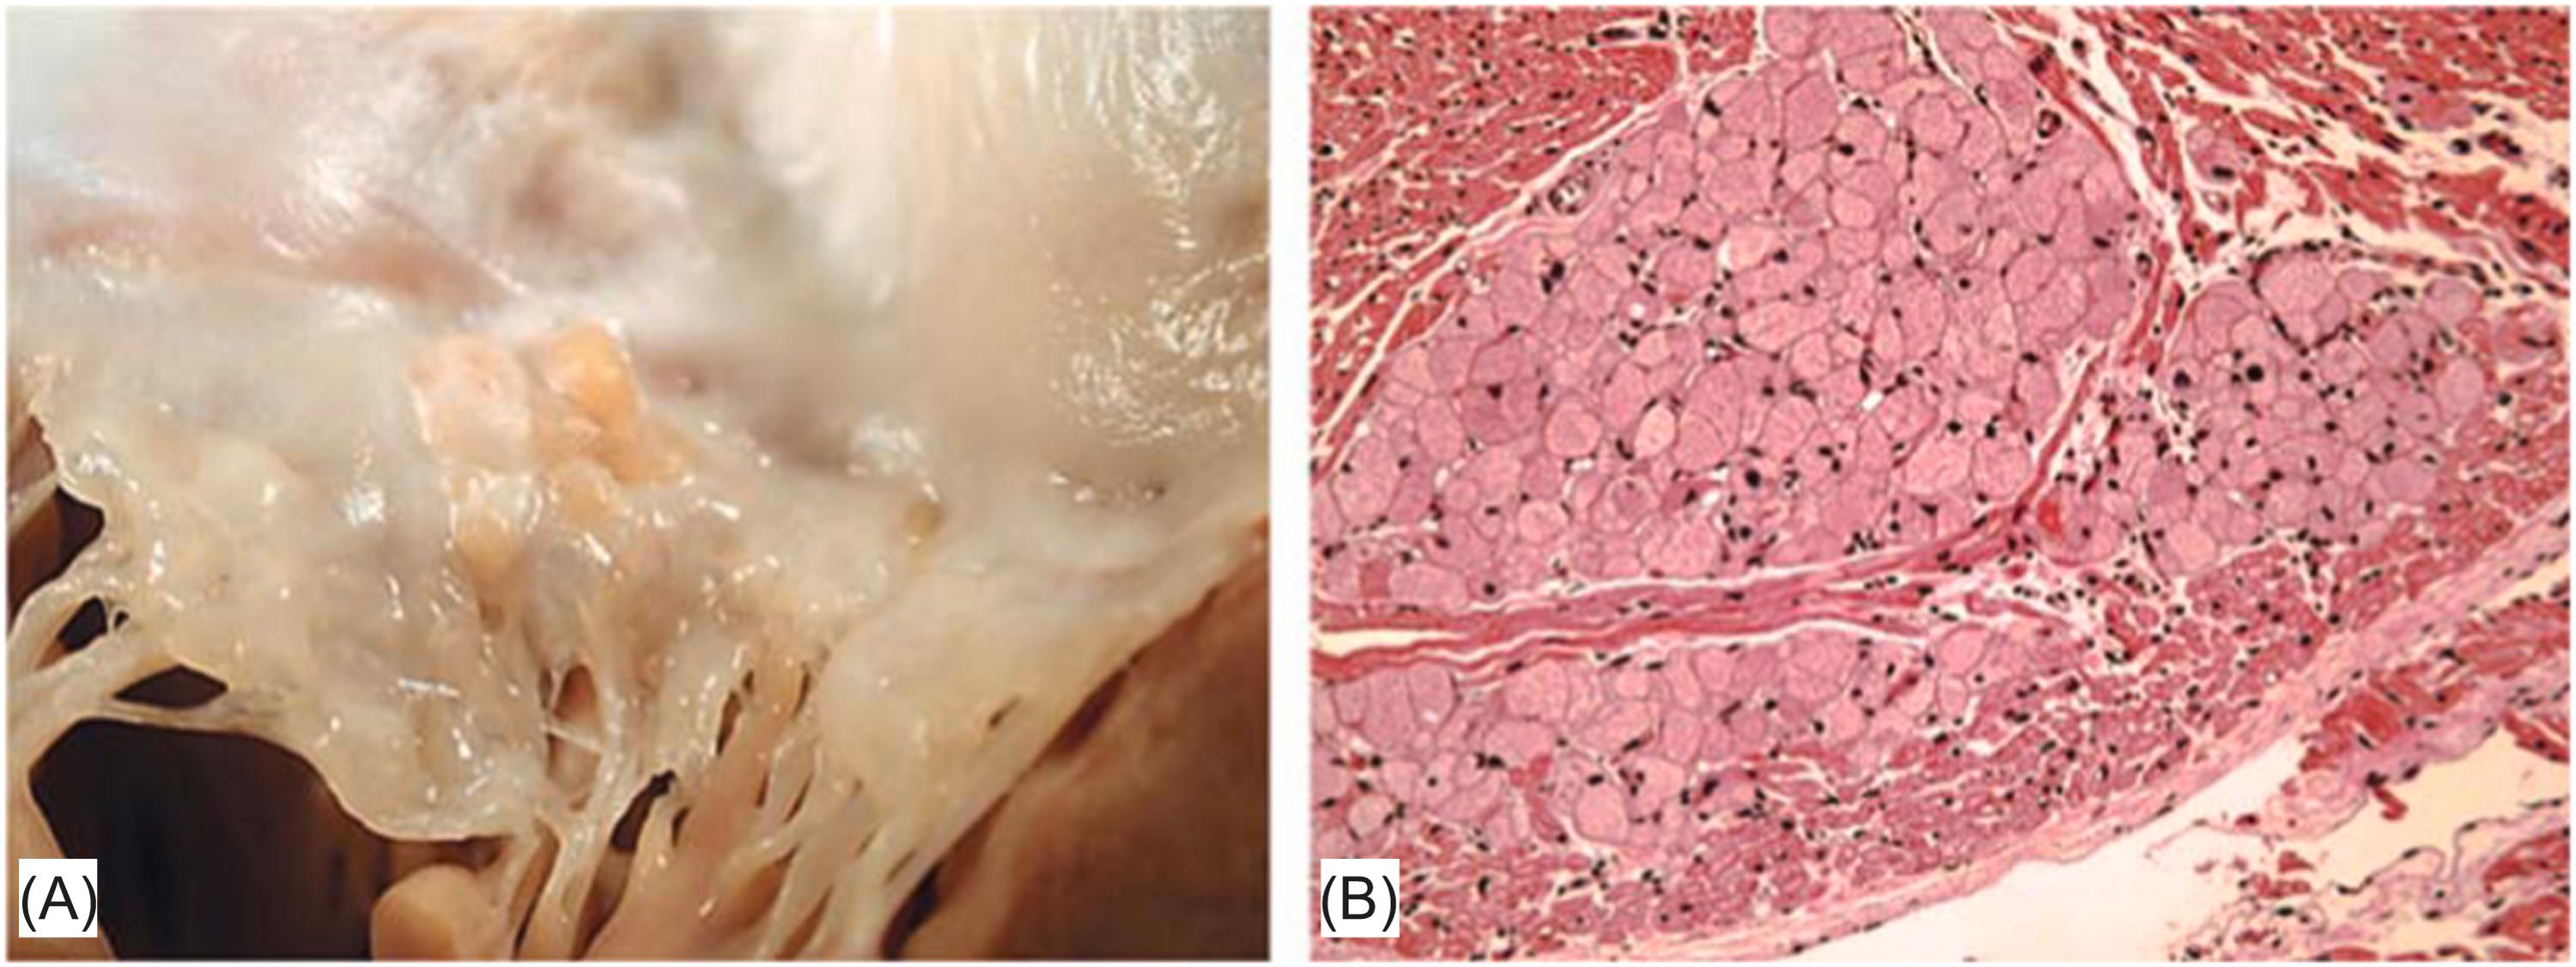 Figure 19.10, Purkinje cell hamartoma (oncocytic/histiocytoid cardiomyopathy). (A) Gross picture of a heart demonstrating the left atrium and portion of the mitral valve. Note pale tan endocardial nodules at the level of the annulus. (B) There are nests of clear microvesicular cells in the center of an otherwise unremarkable myocardium (H&E stain).